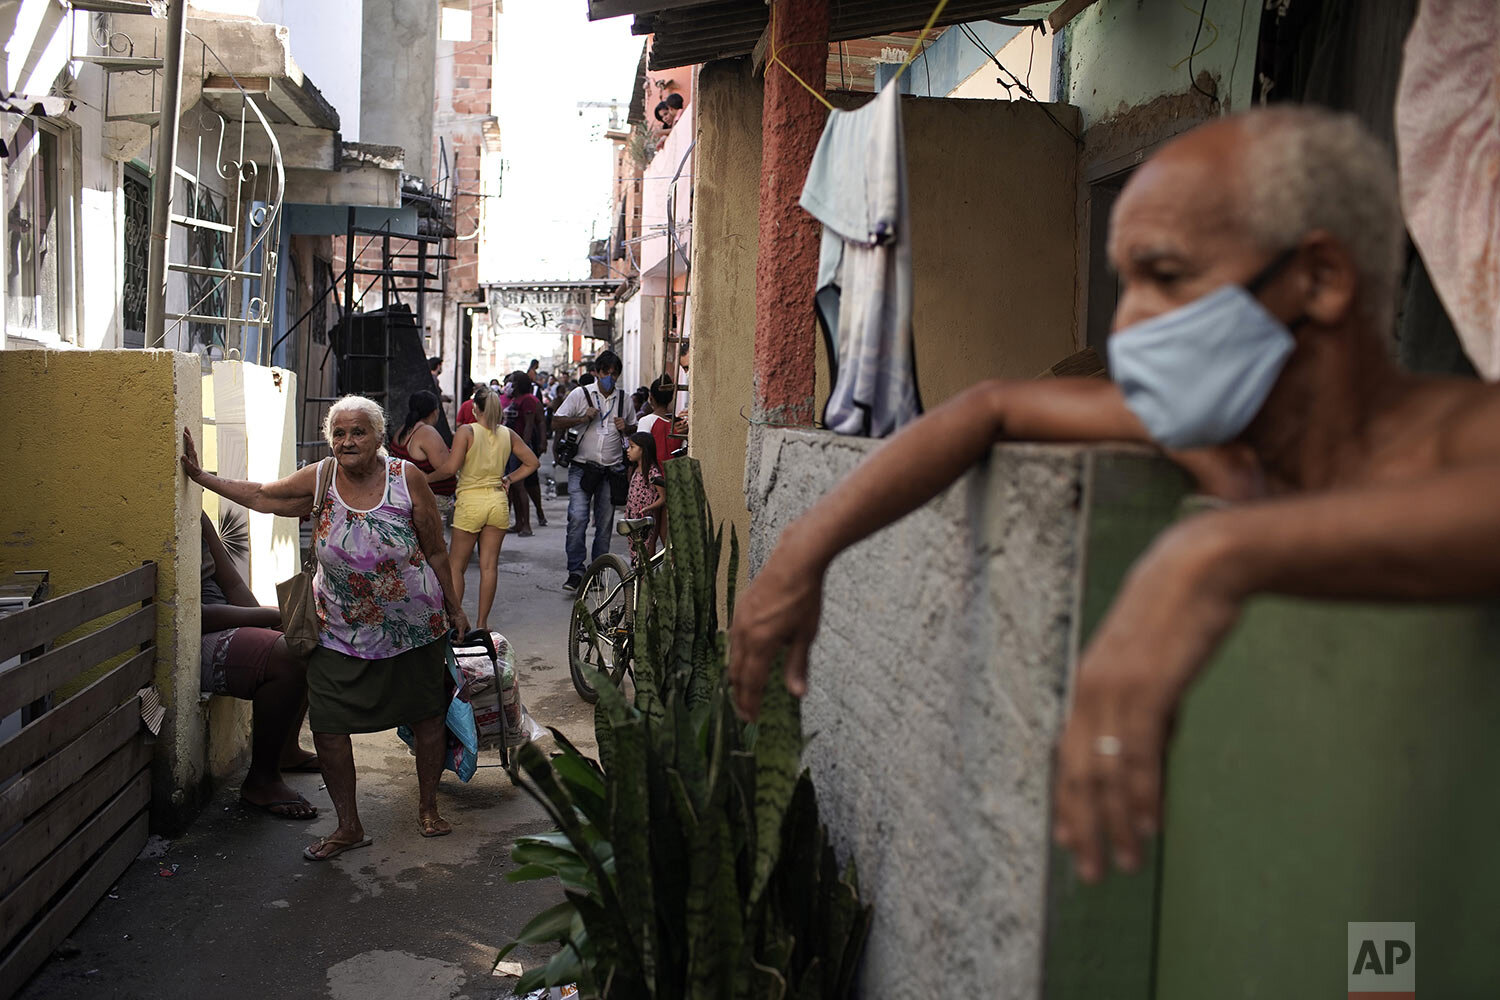  An elderly woman pulls a grocery caddy filled with food donated by a non-governmental agency amid the the new coronavirus pandemic, in the Mandela favela, in Rio de Janeiro, Brazil, April 21, 2020. (AP Photo/Silvia Izquierdo) 